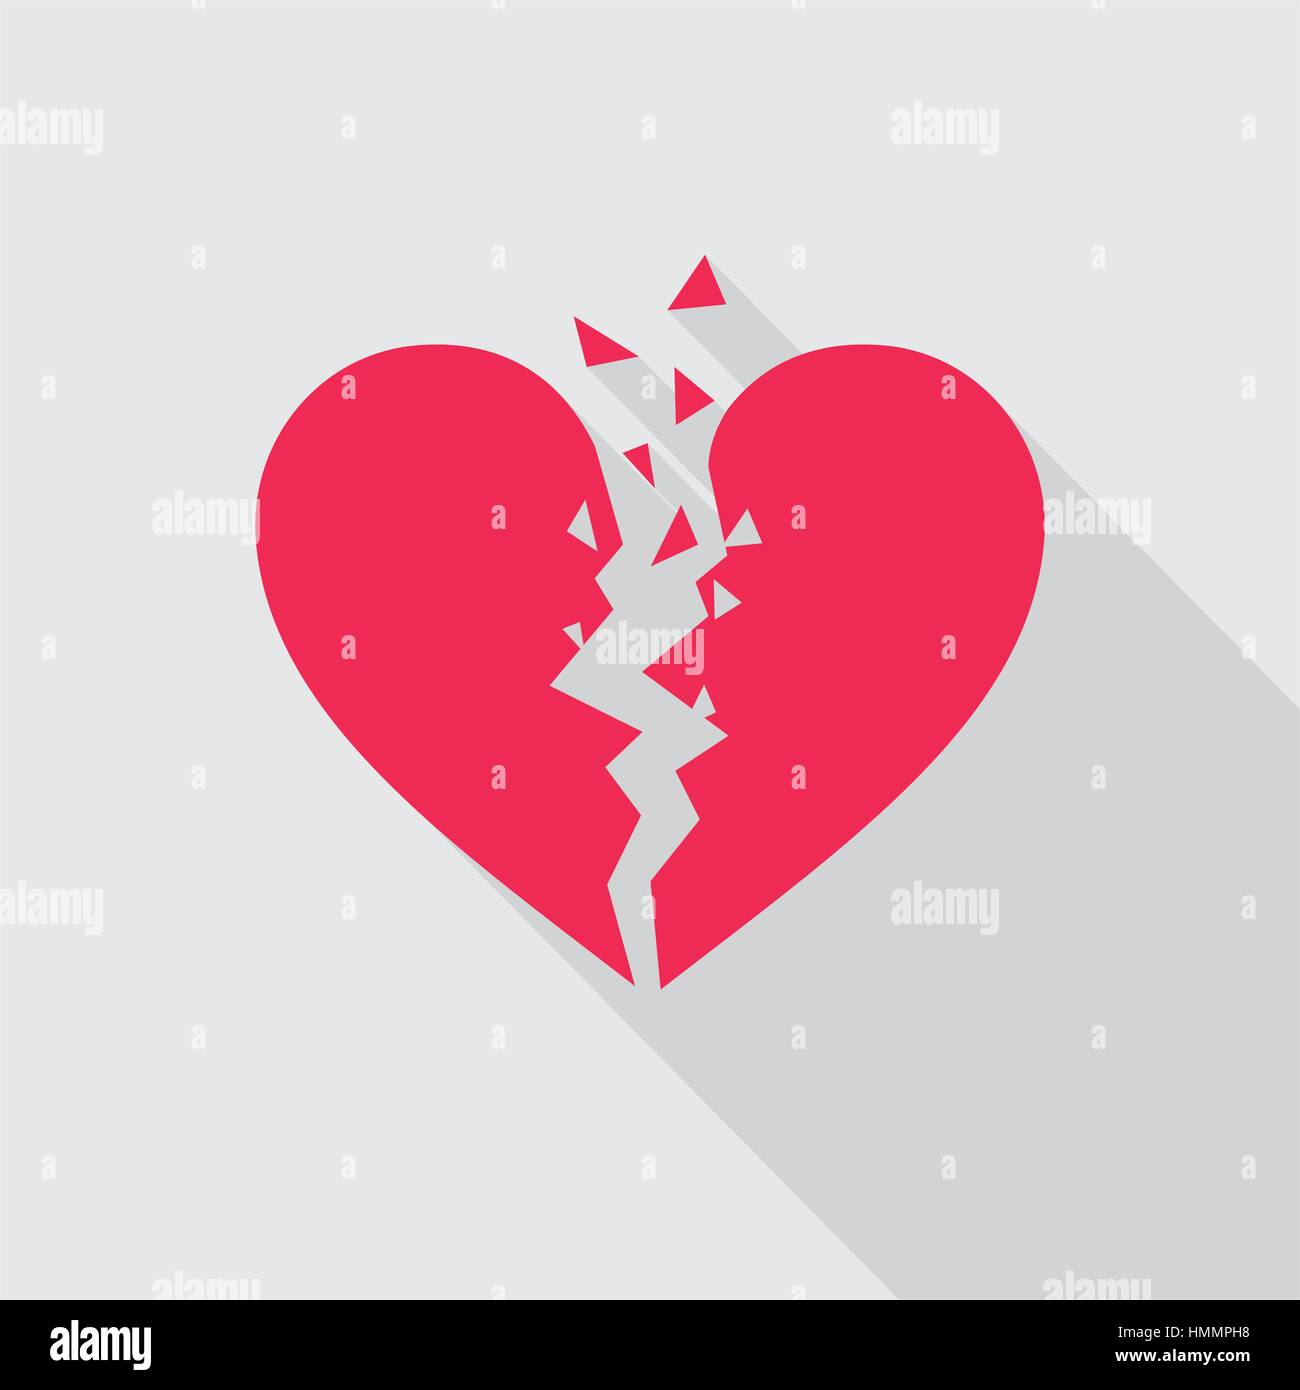 Broken heart flat icon in red color on gray background. Symbol of cracked heart. Vector illustration in EPS8 format. Stock Vector